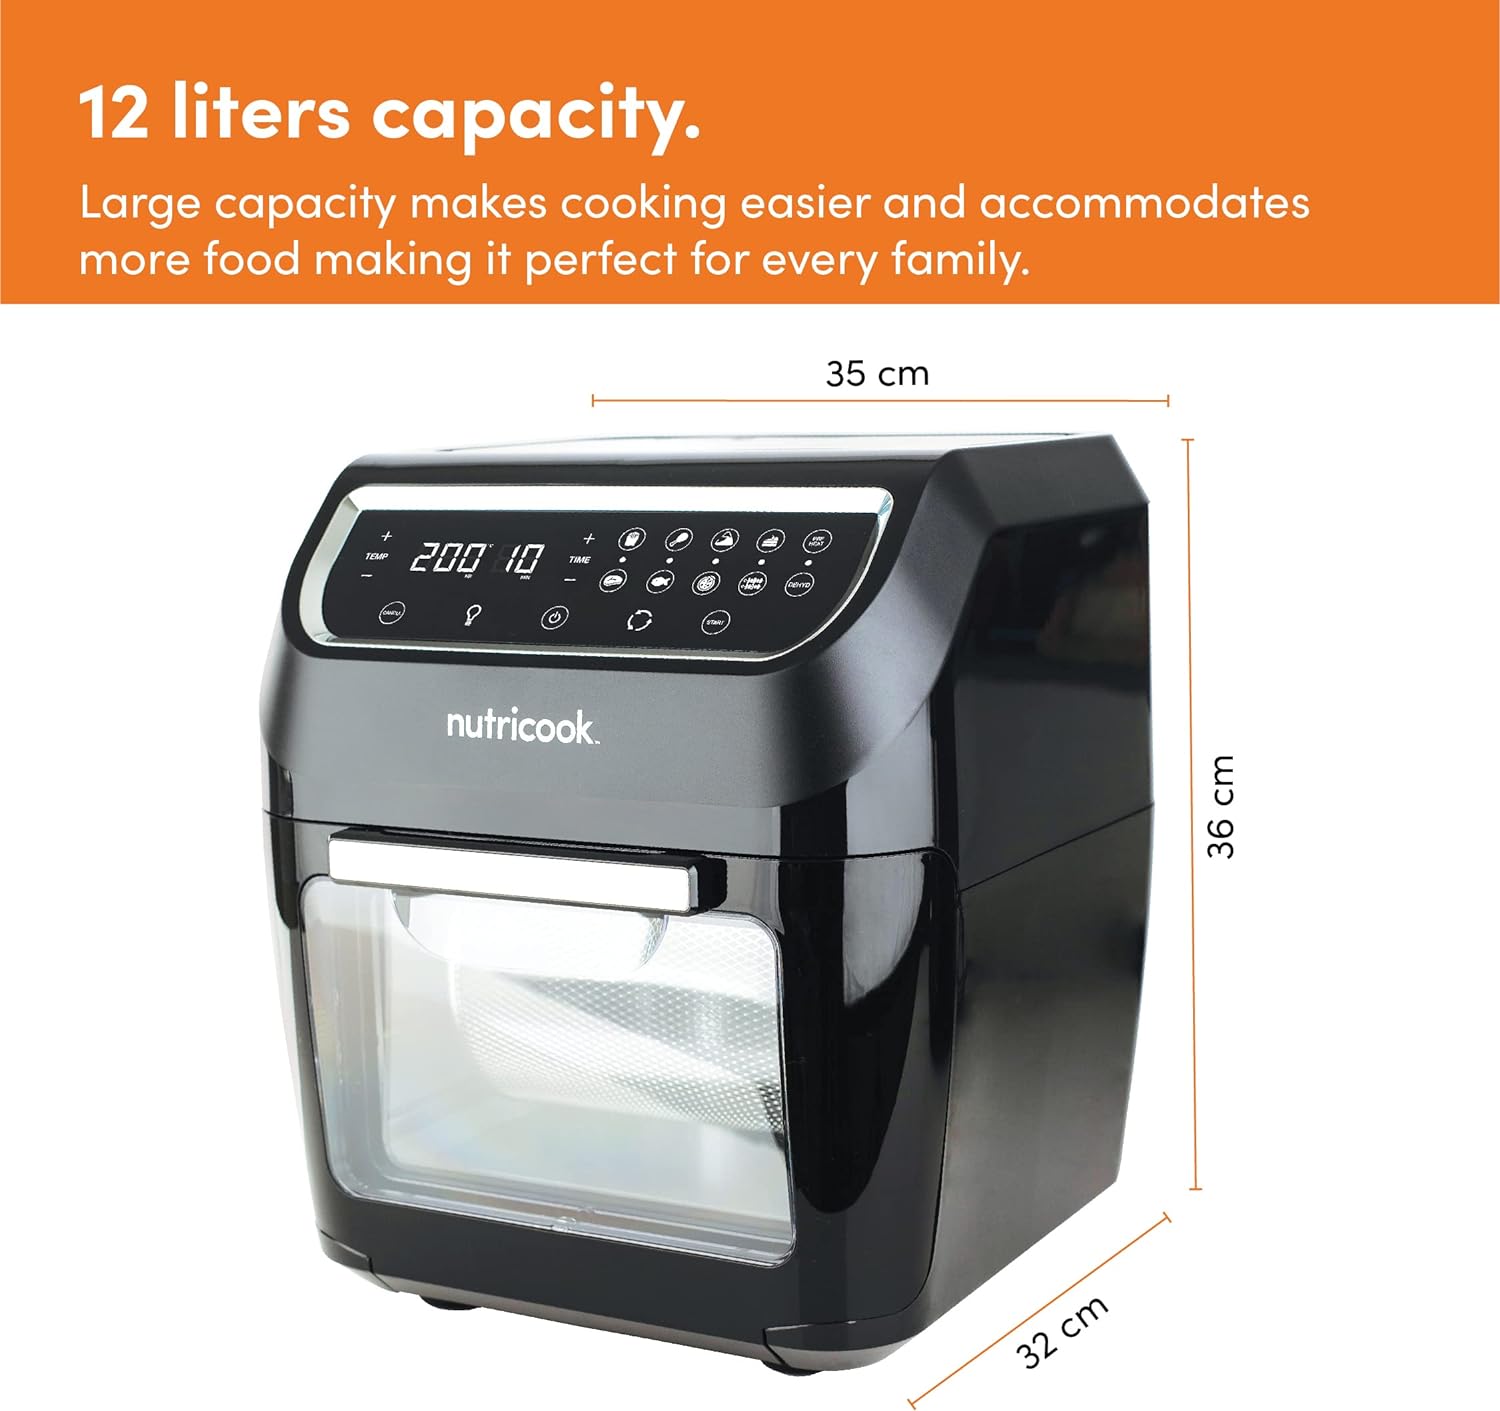 Nutricook Airfryer Oven 12L / Digital One Touch Control Panel Display - Black